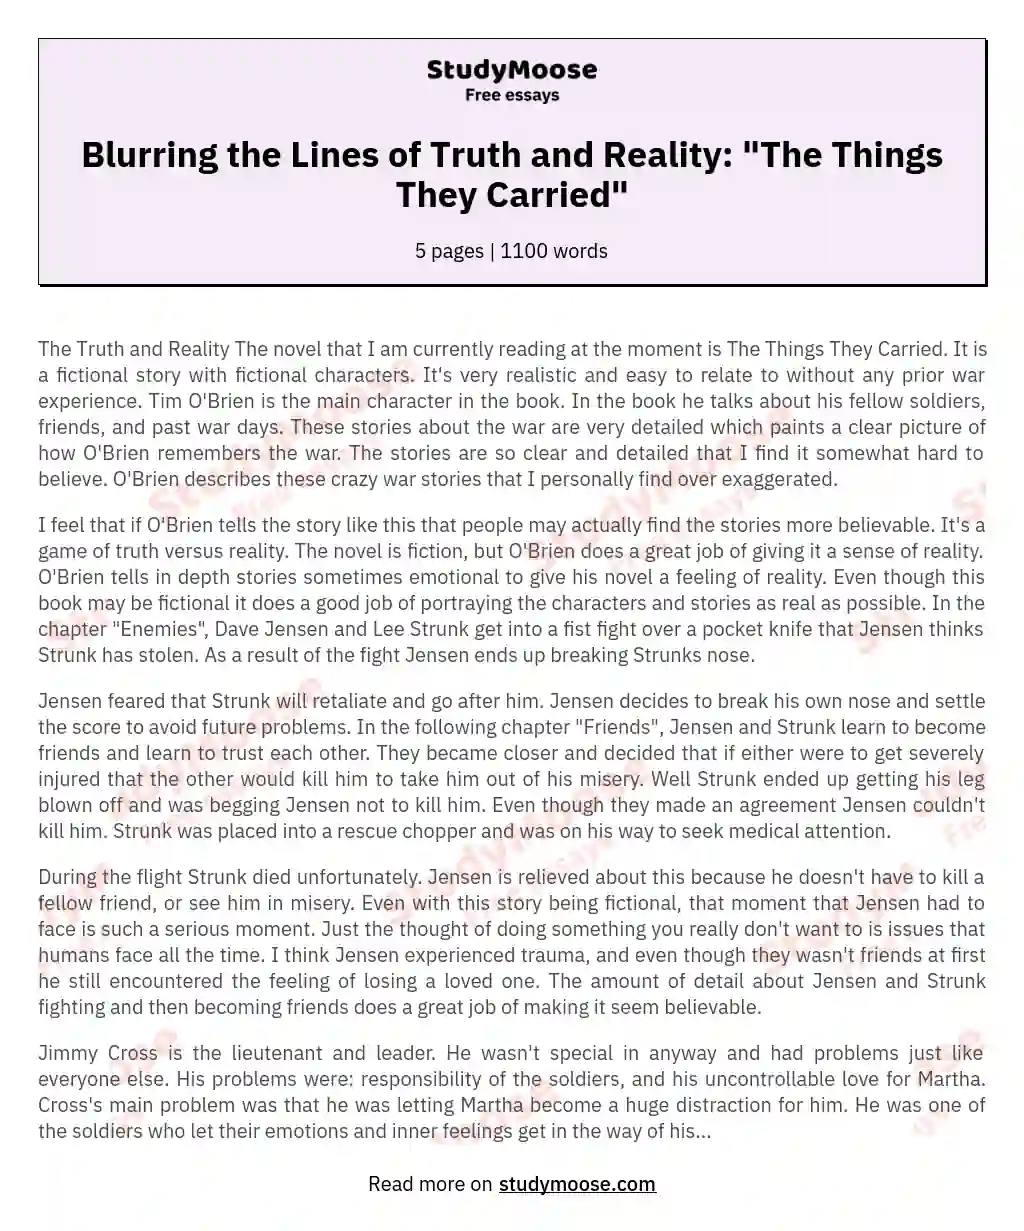 Blurring the Lines of Truth and Reality: "The Things They Carried" essay